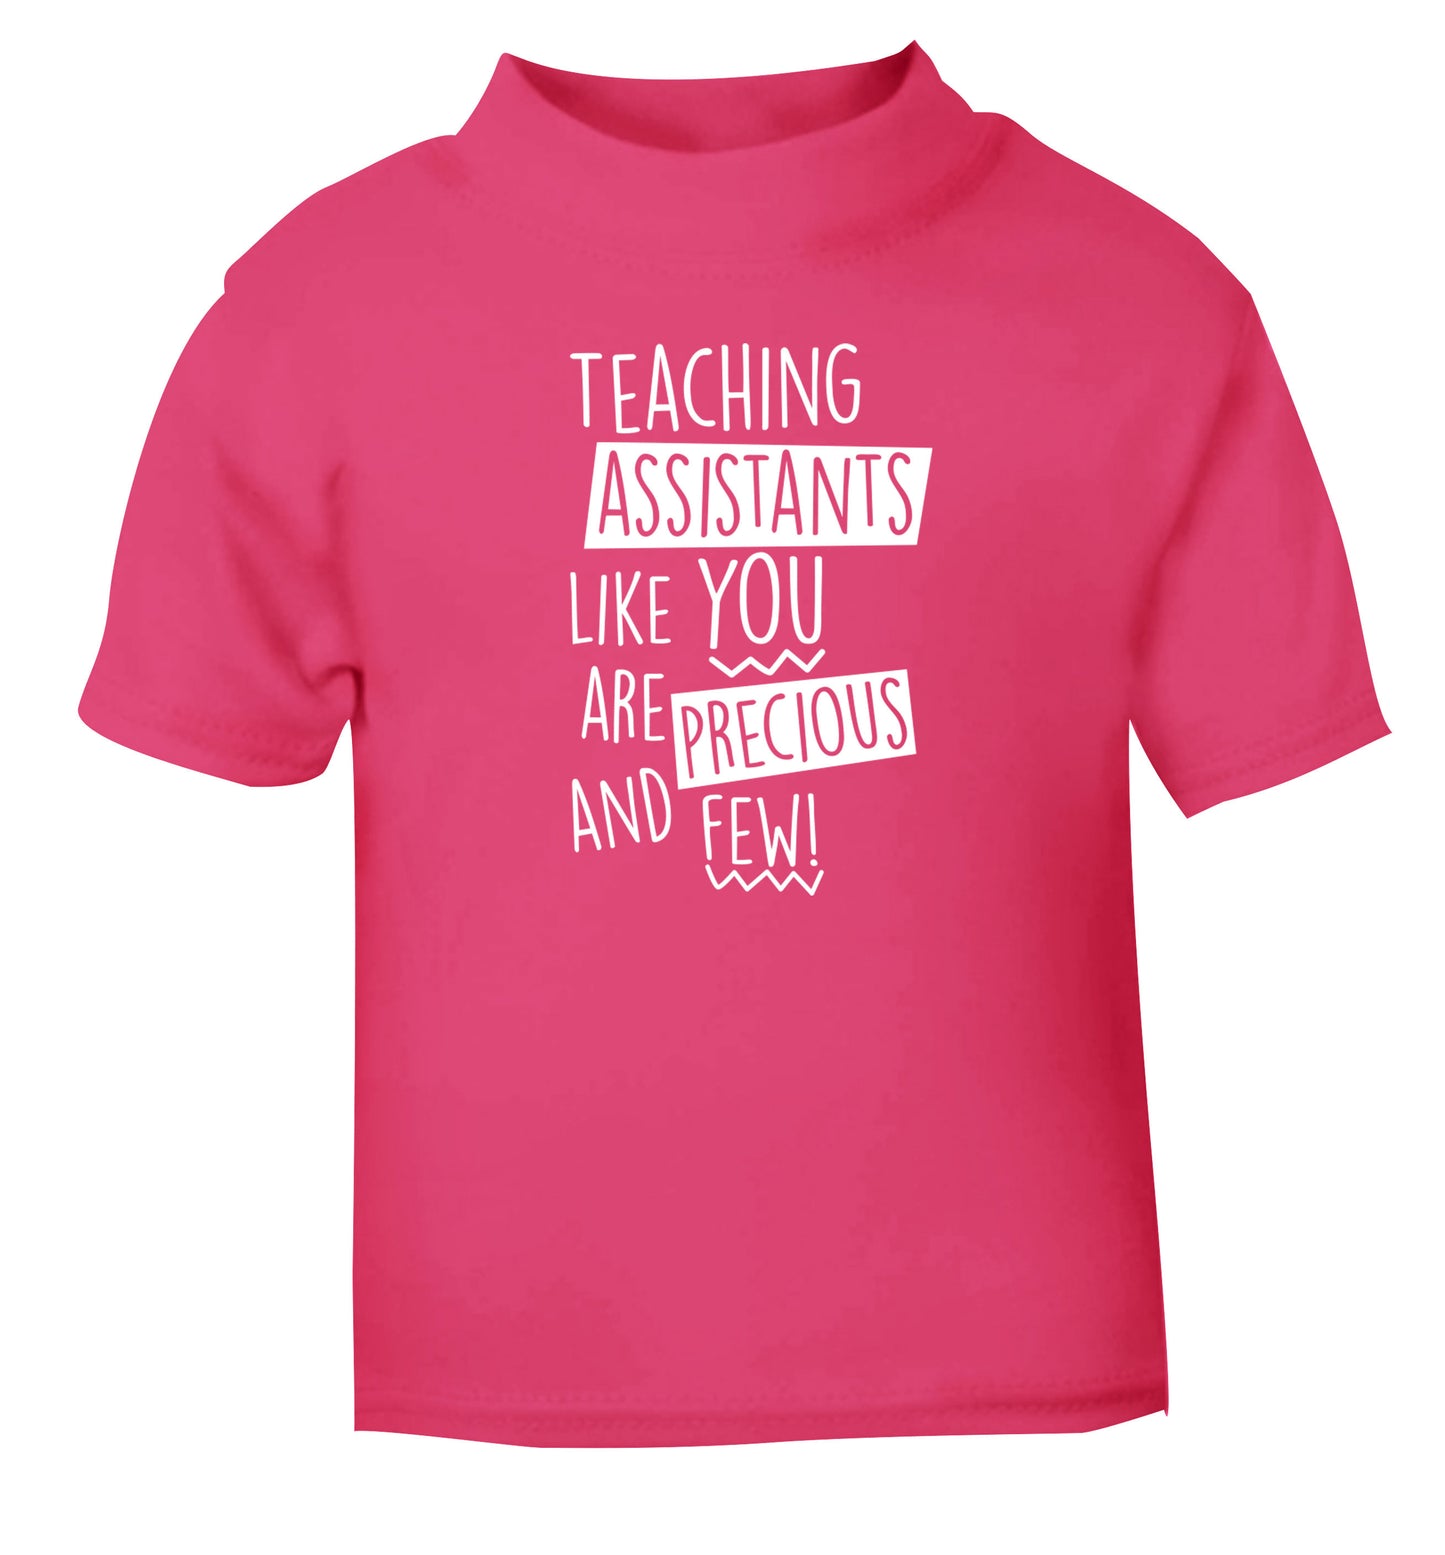 Teaching assistants like you are previous and few! pink Baby Toddler Tshirt 2 Years